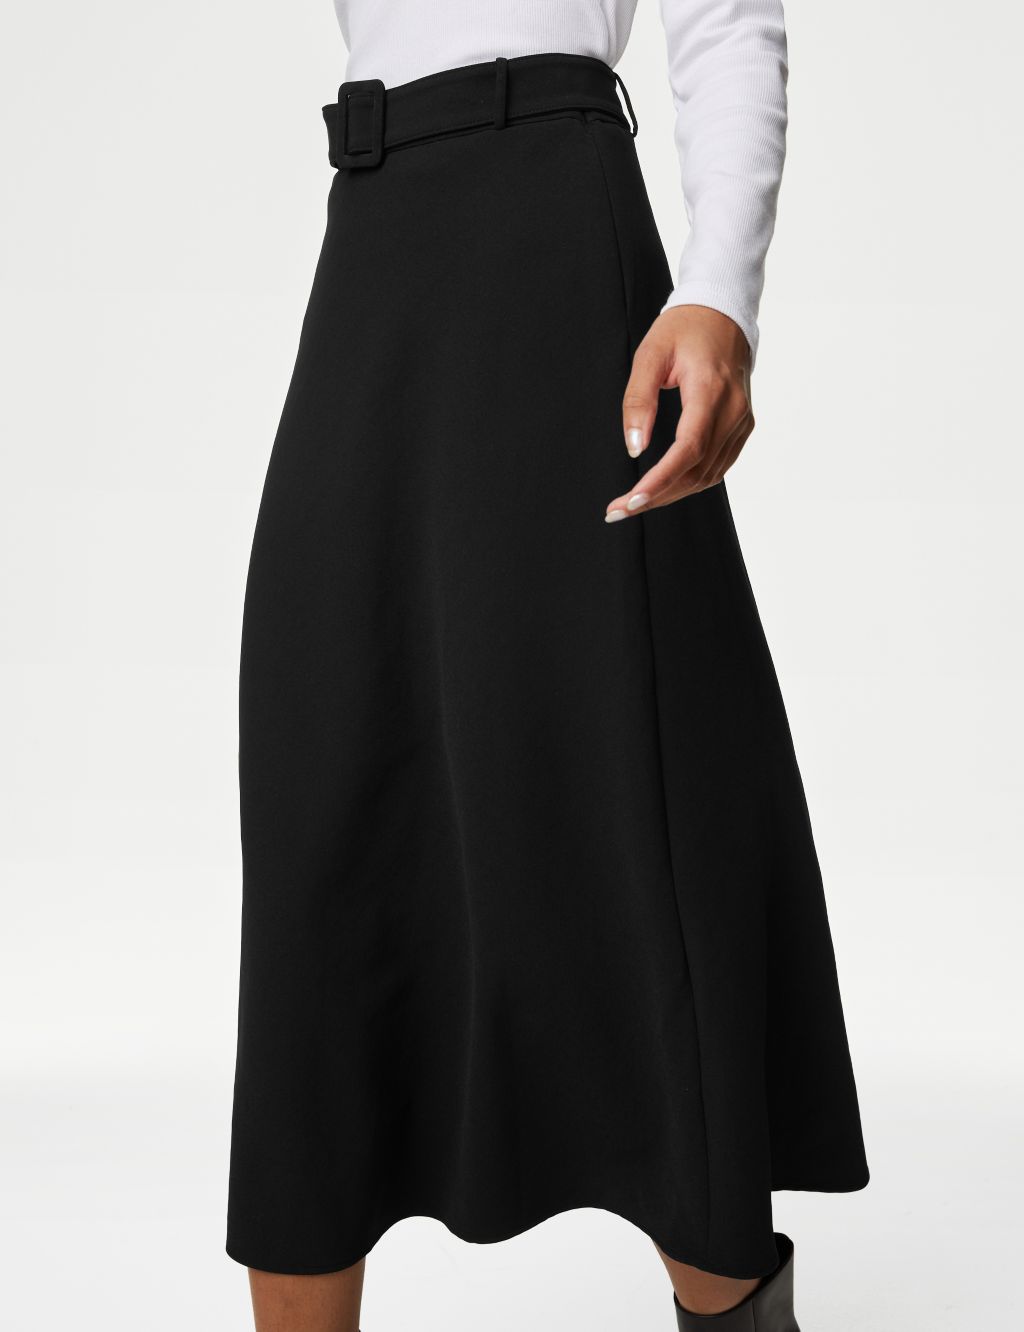 Belted Midaxi A-Line Skirt image 1